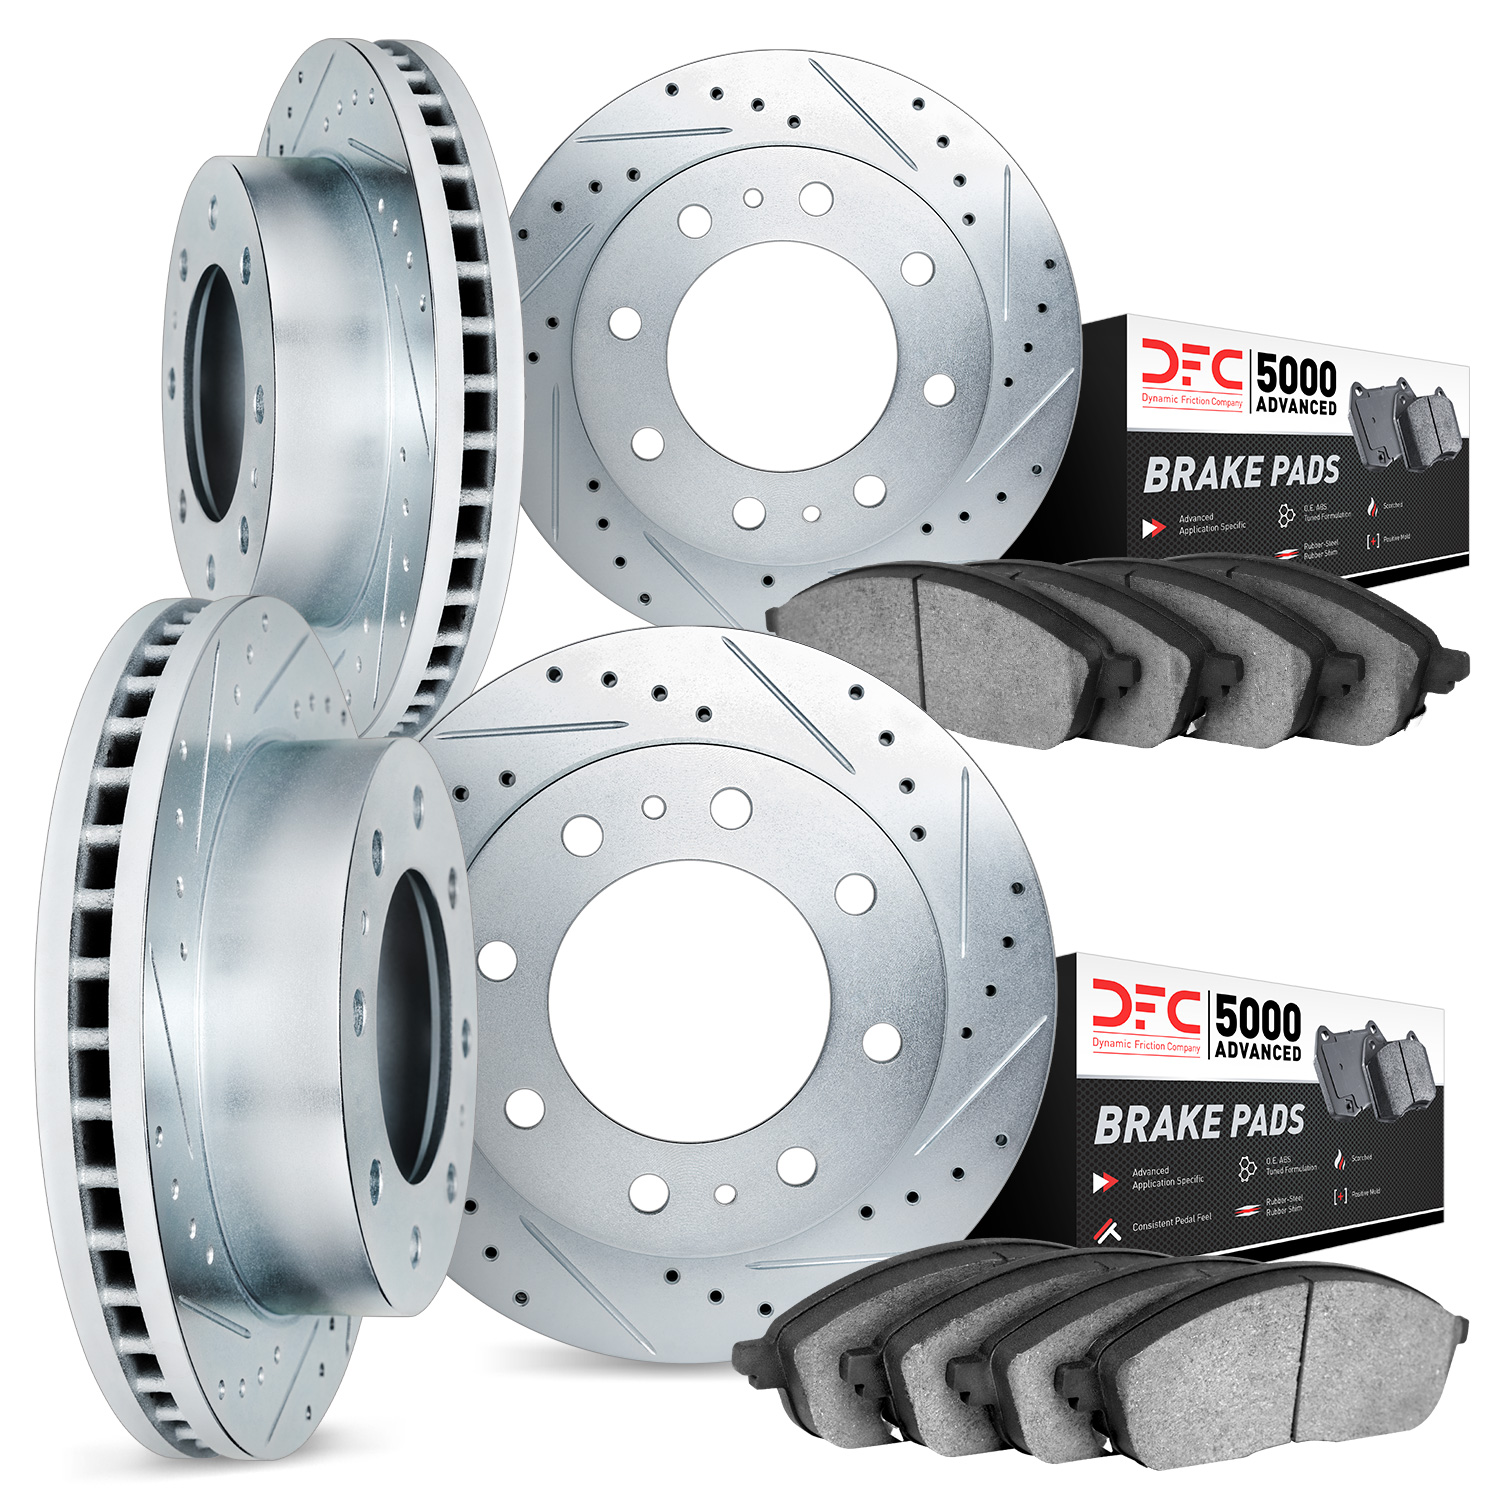 7504-48025 Drilled/Slotted Brake Rotors w/5000 Advanced Brake Pads Kit [Silver], 2018-2020 GM, Position: Front and Rear